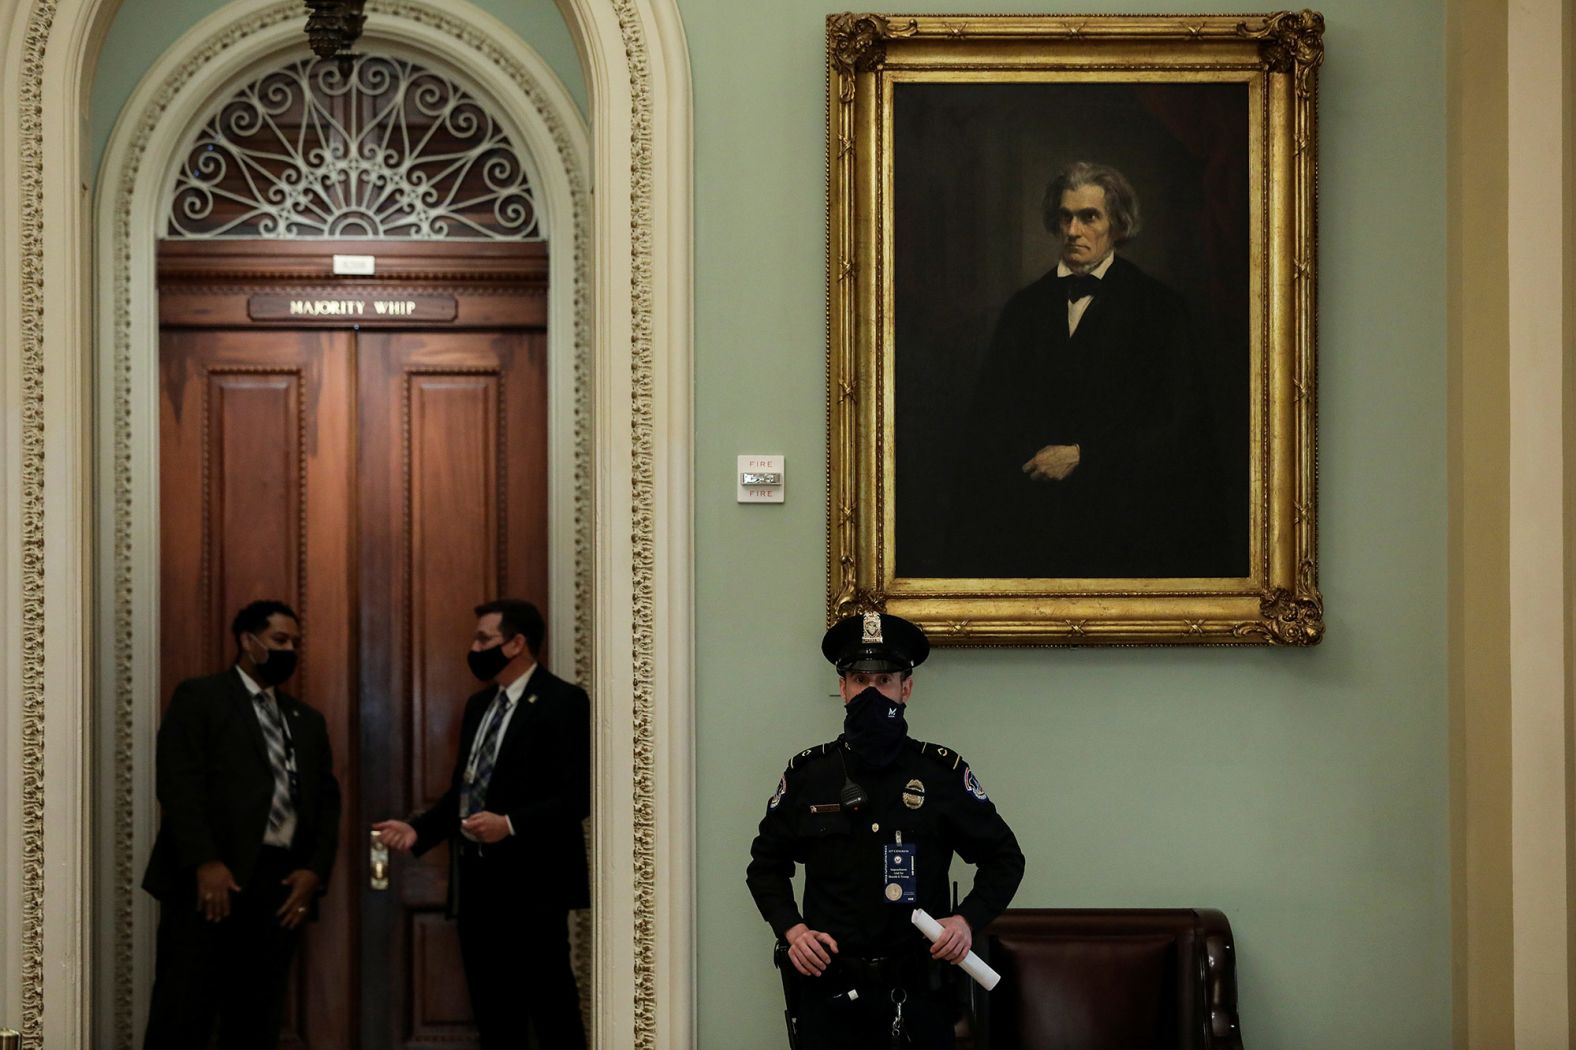 A Capitol Police officer stands watch as senators arrive at the Senate Chamber on Tuesday.